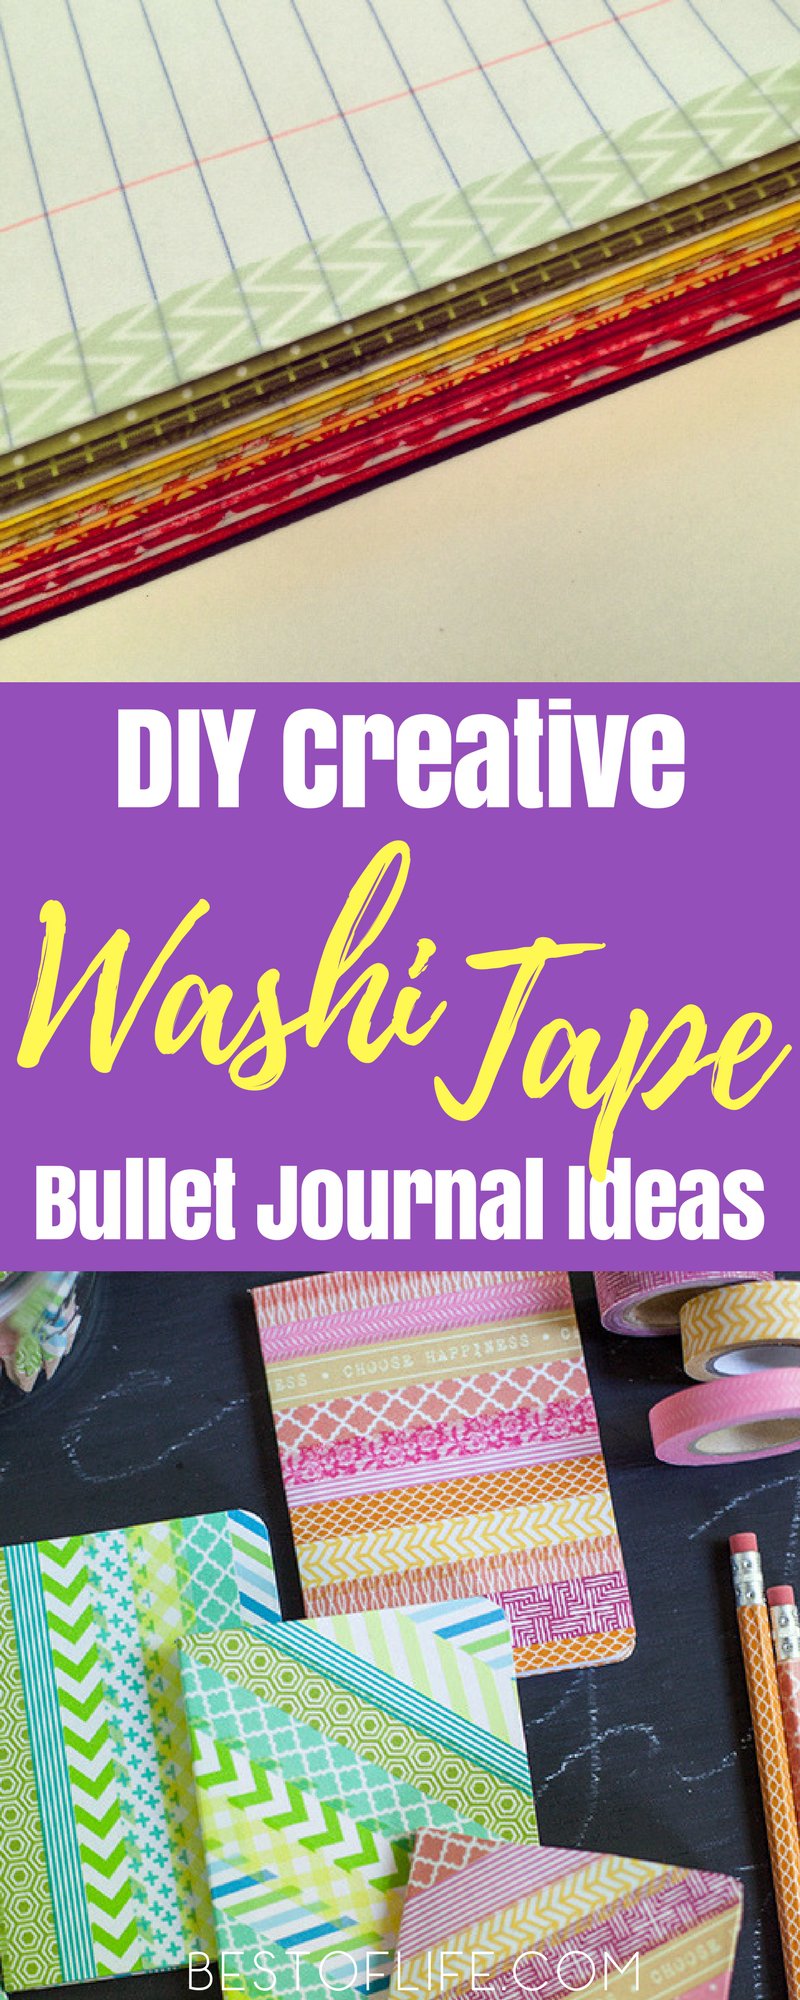 Use the best washi tape ideas to get creative with your bullet journal and bring out any inner designer you may have. Easy Washi Tape Ideas | How to Use Washi Tape | What is Washi Tape | Bullet Journal Design Ideas | BuJo Designs | BuJo Ideas